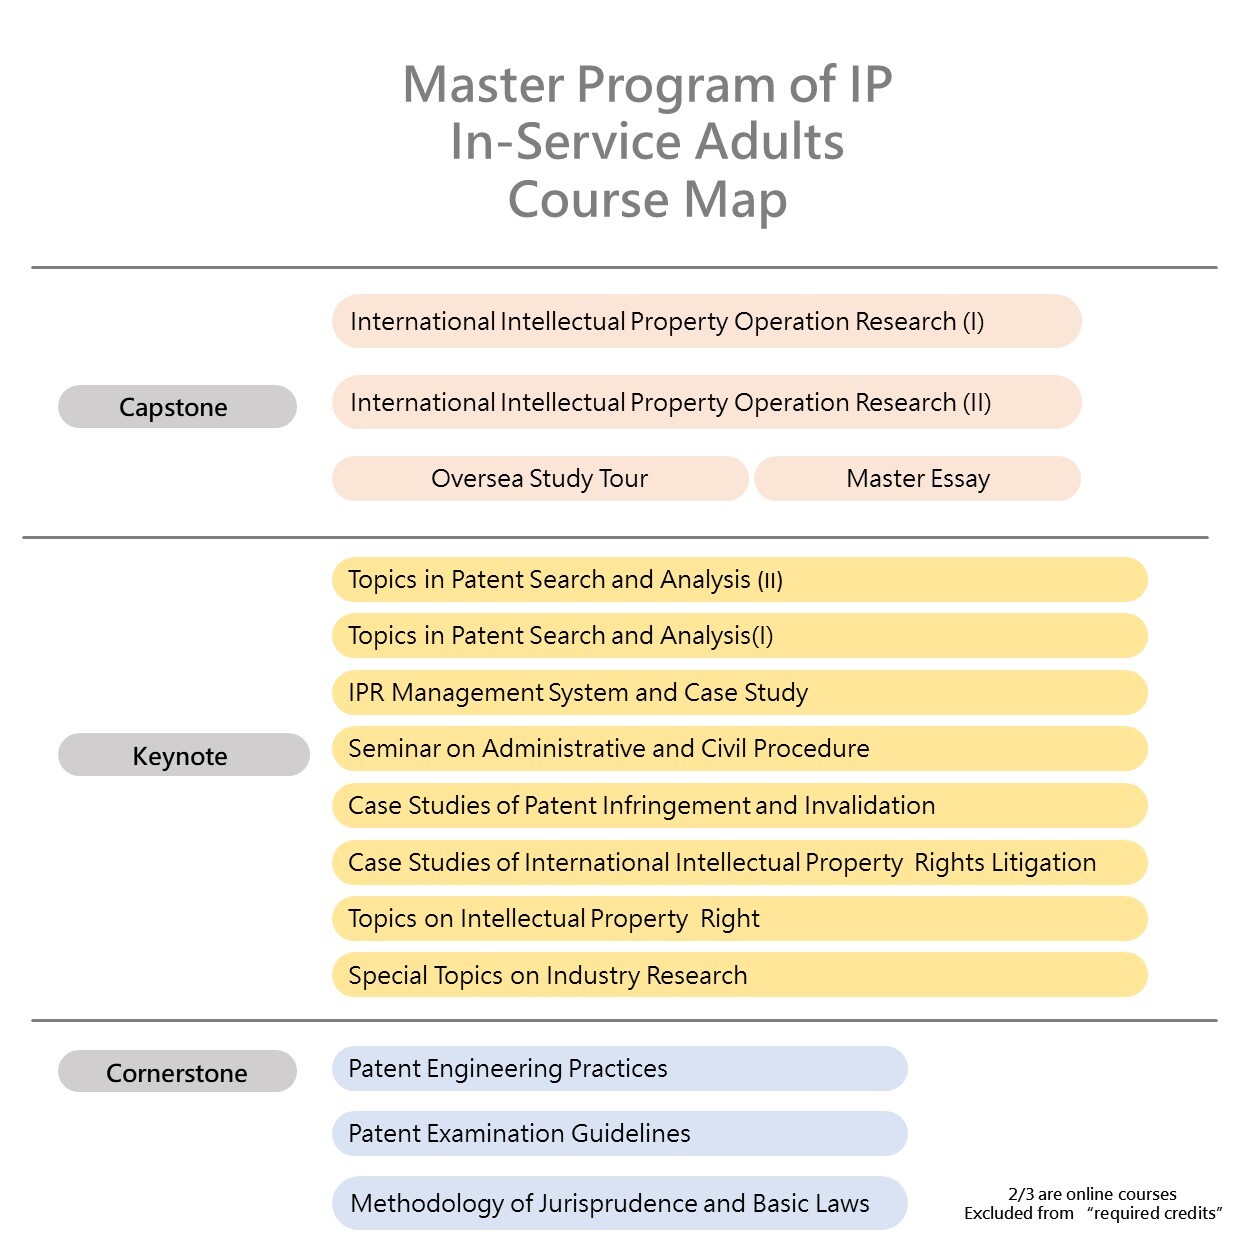 Master Program of IP In-Service Adults Course Map